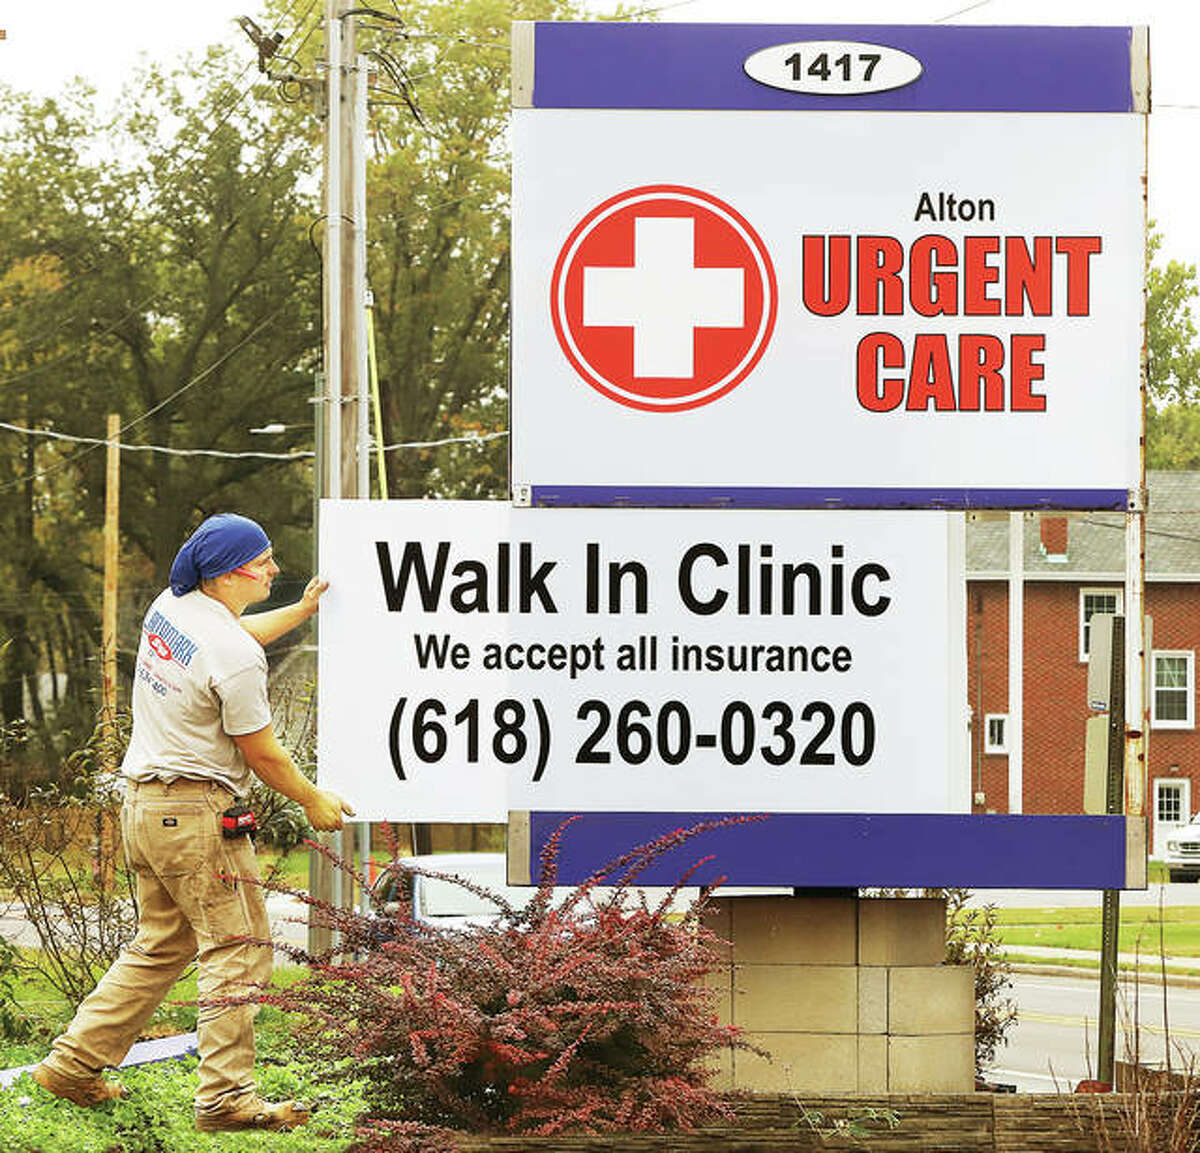 The Urgent Care Walk-In Clinic, part of the Doctor’s Urgent Care Group, has opened a seven-day-a-week clinic at 1417 Washington Ave., Alton. For more details, call 618-260-0320.